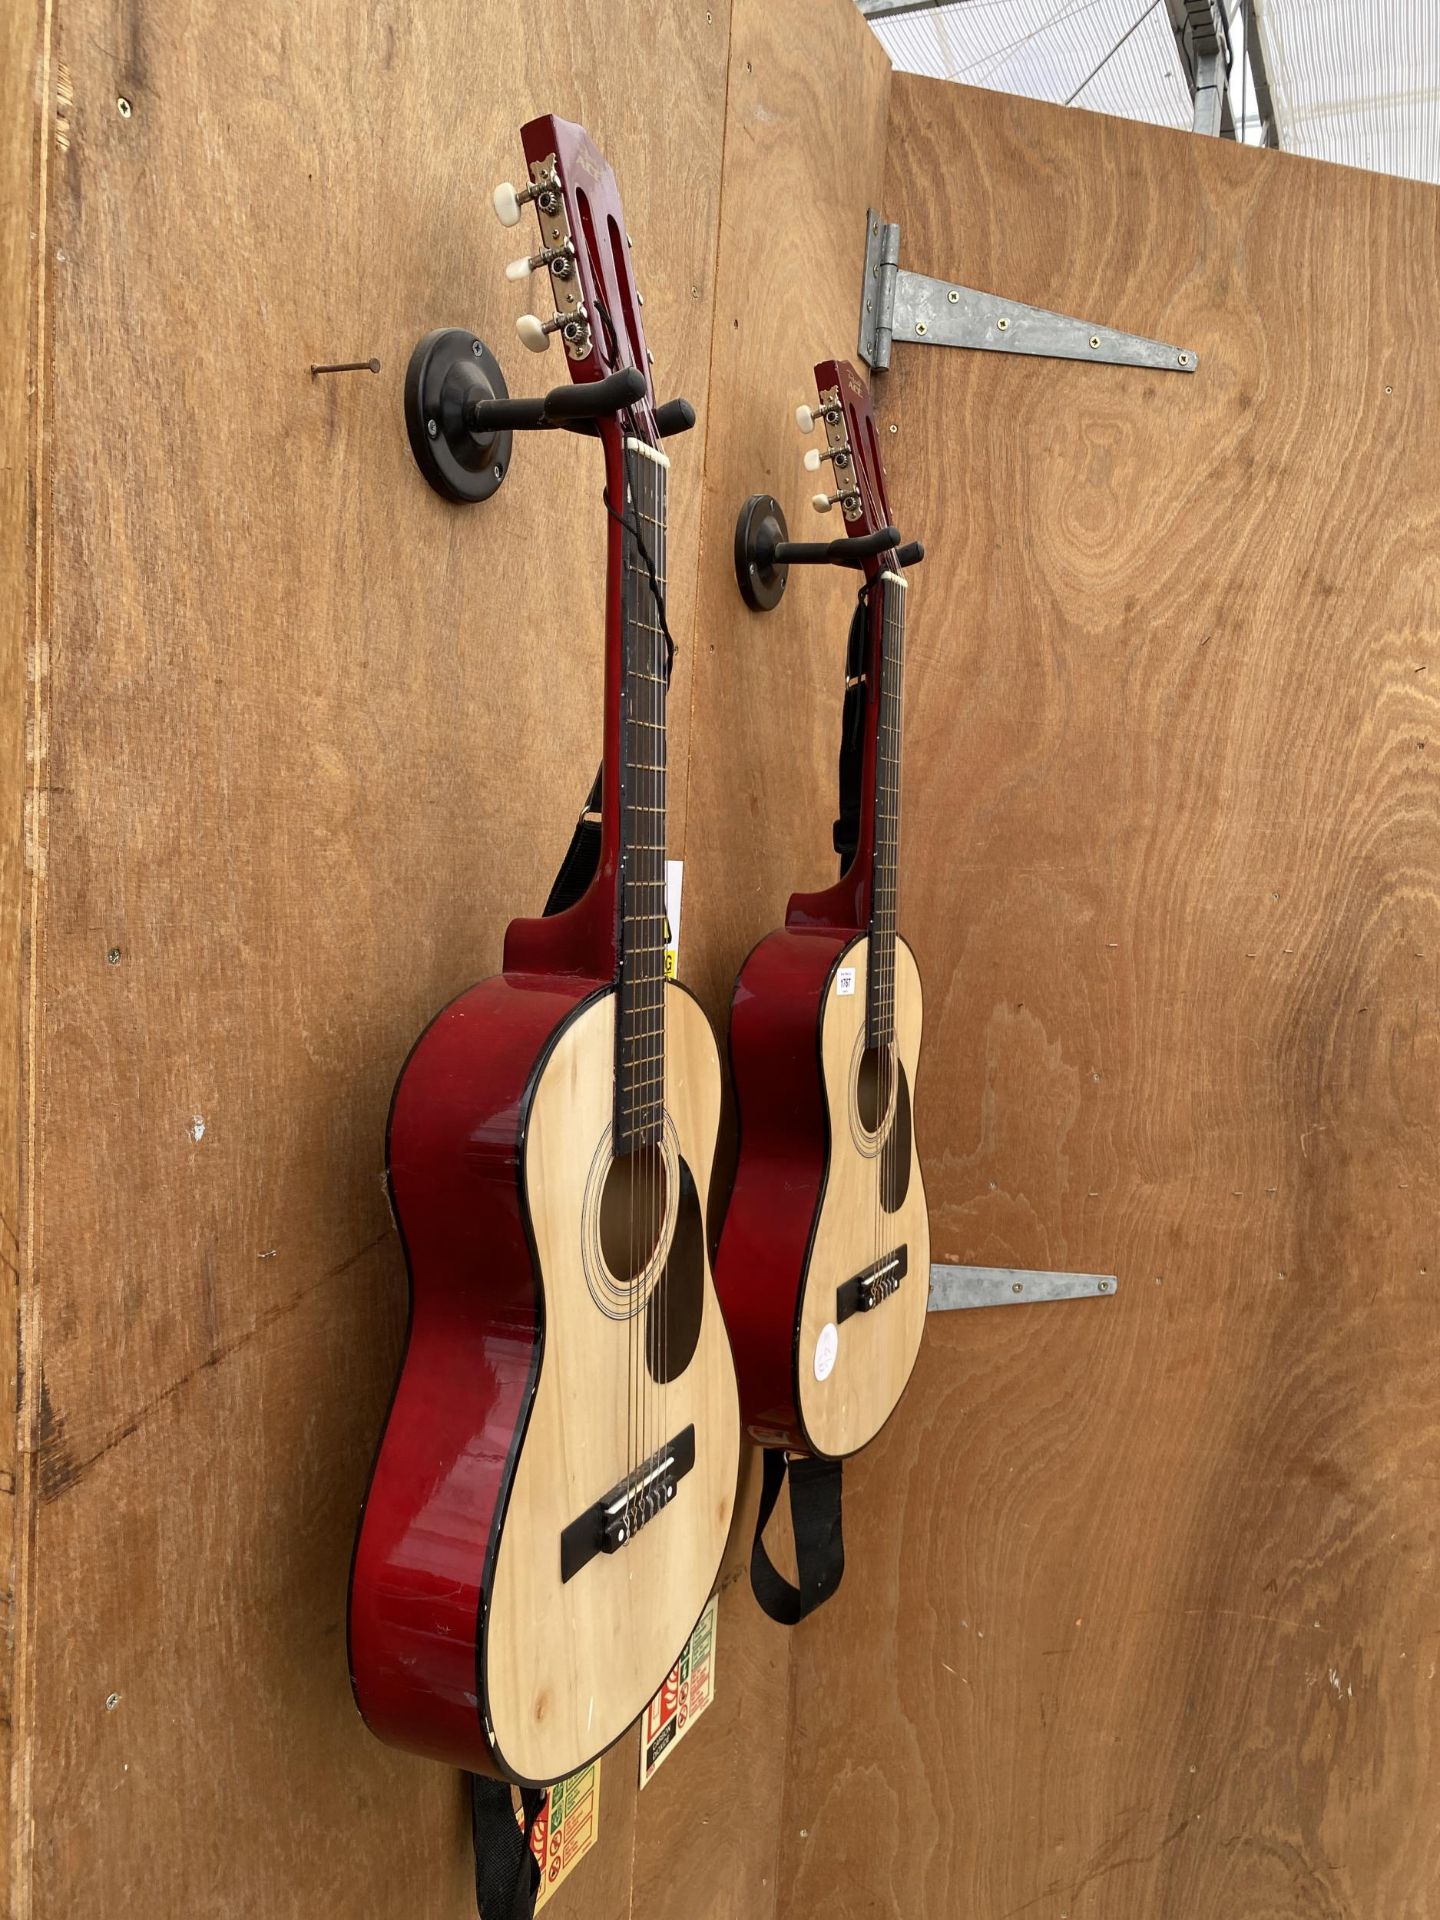 A PAIR OF READY ACE ACOUSTIC GUITARS - Image 2 of 5